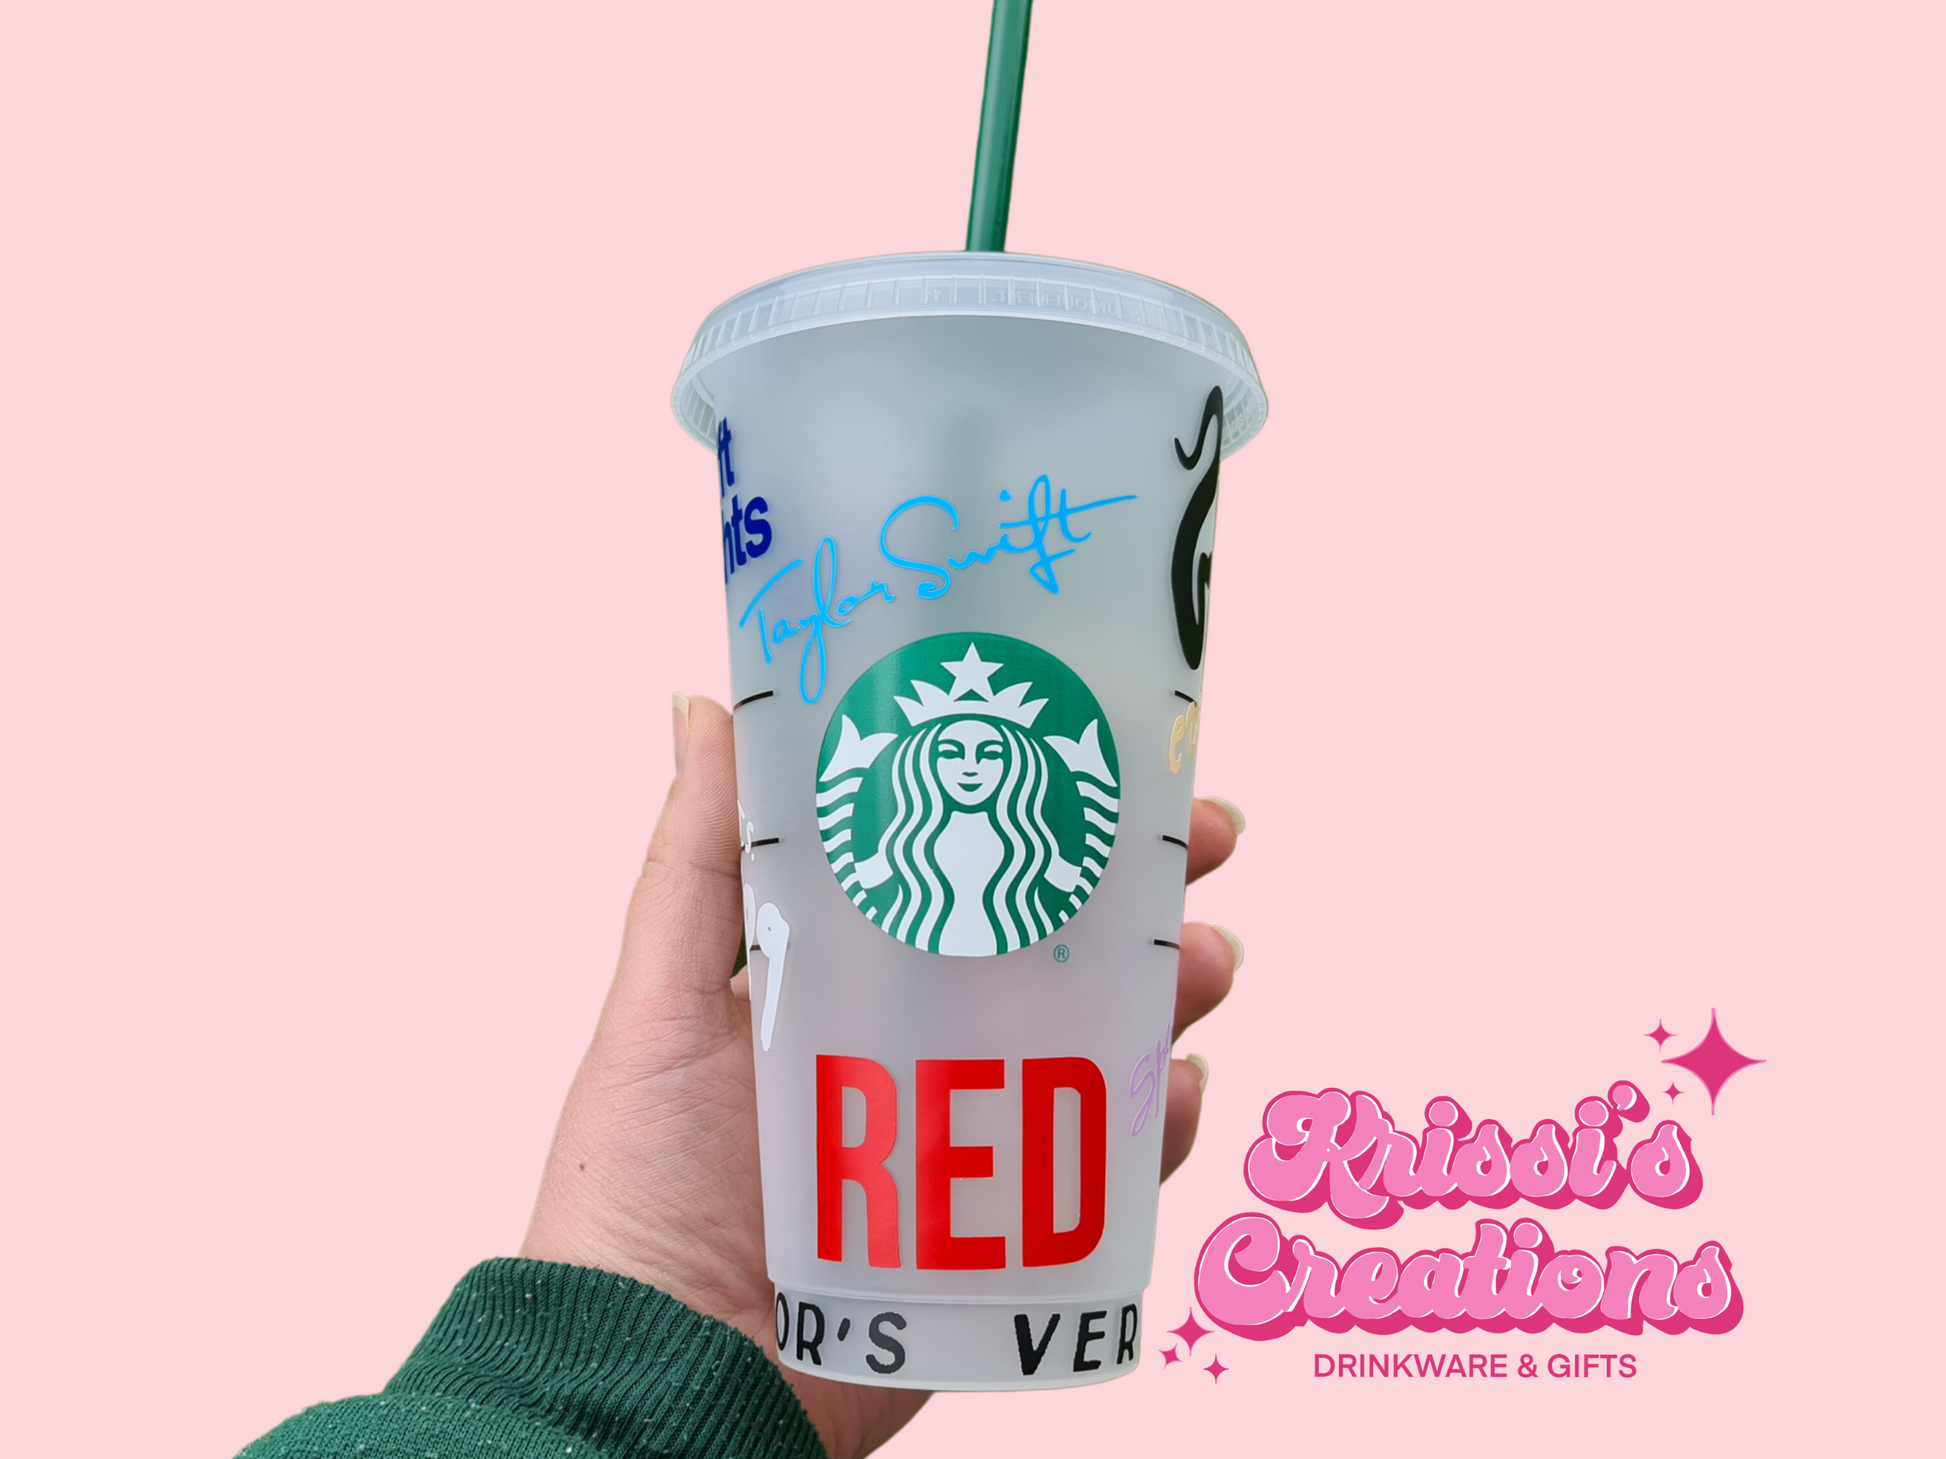 Taylor Swift Tumbler Cup With Straw, Taylor Swift Albums Cup, Evermore,  Reputation, Red, Speak Now, Fearless, Taylor Swift Gift 